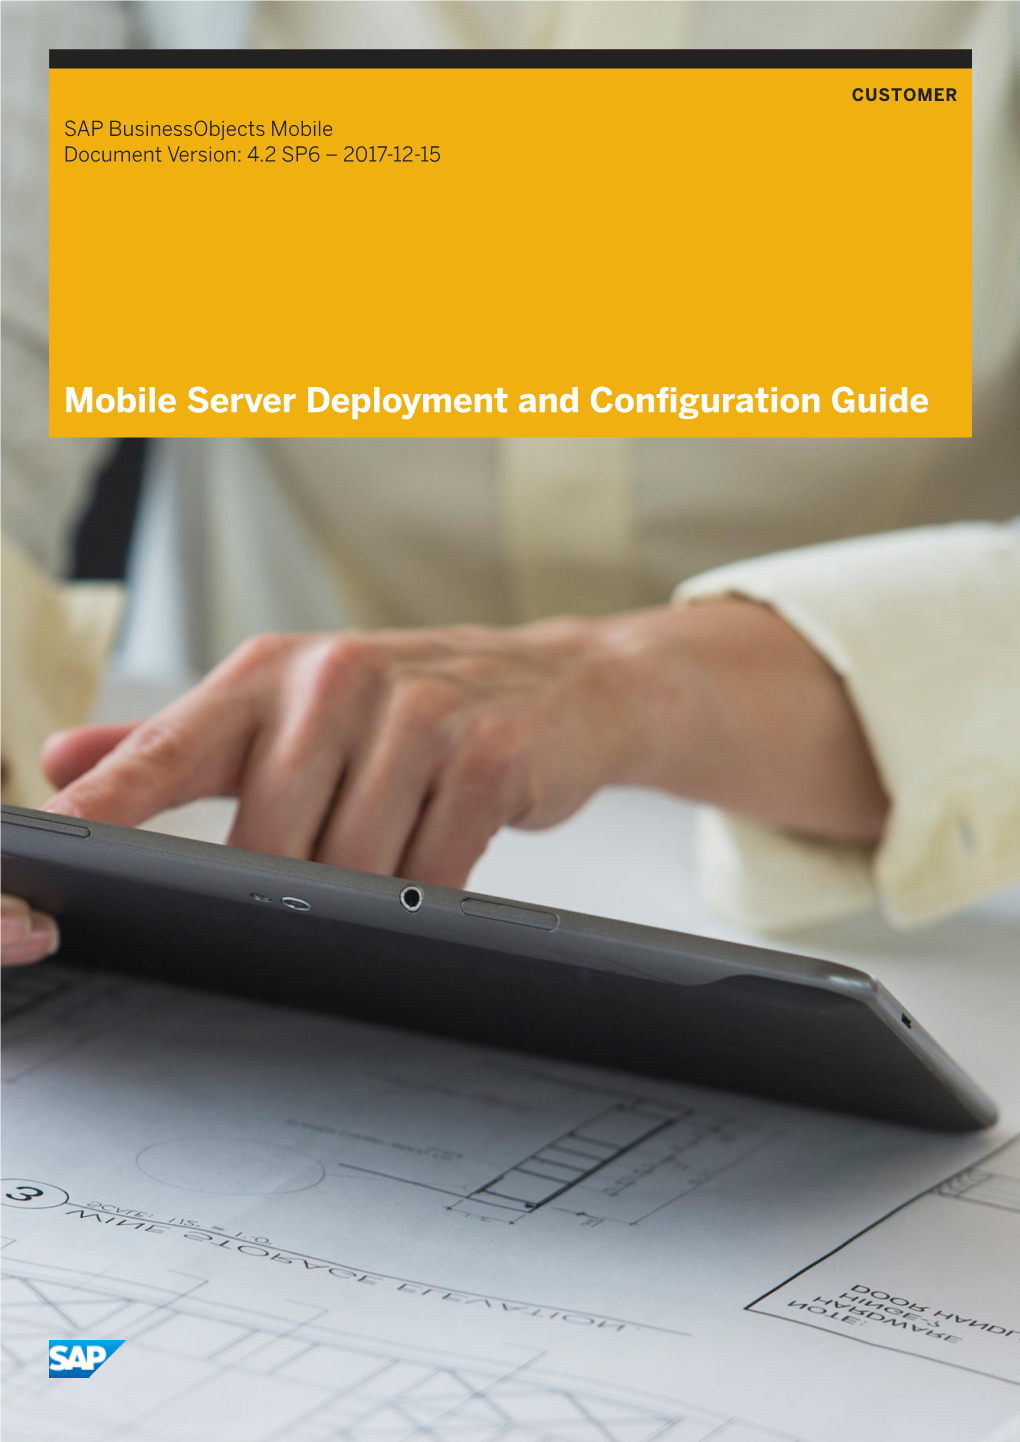 Mobile Server Deployment and Configuration Guide Content